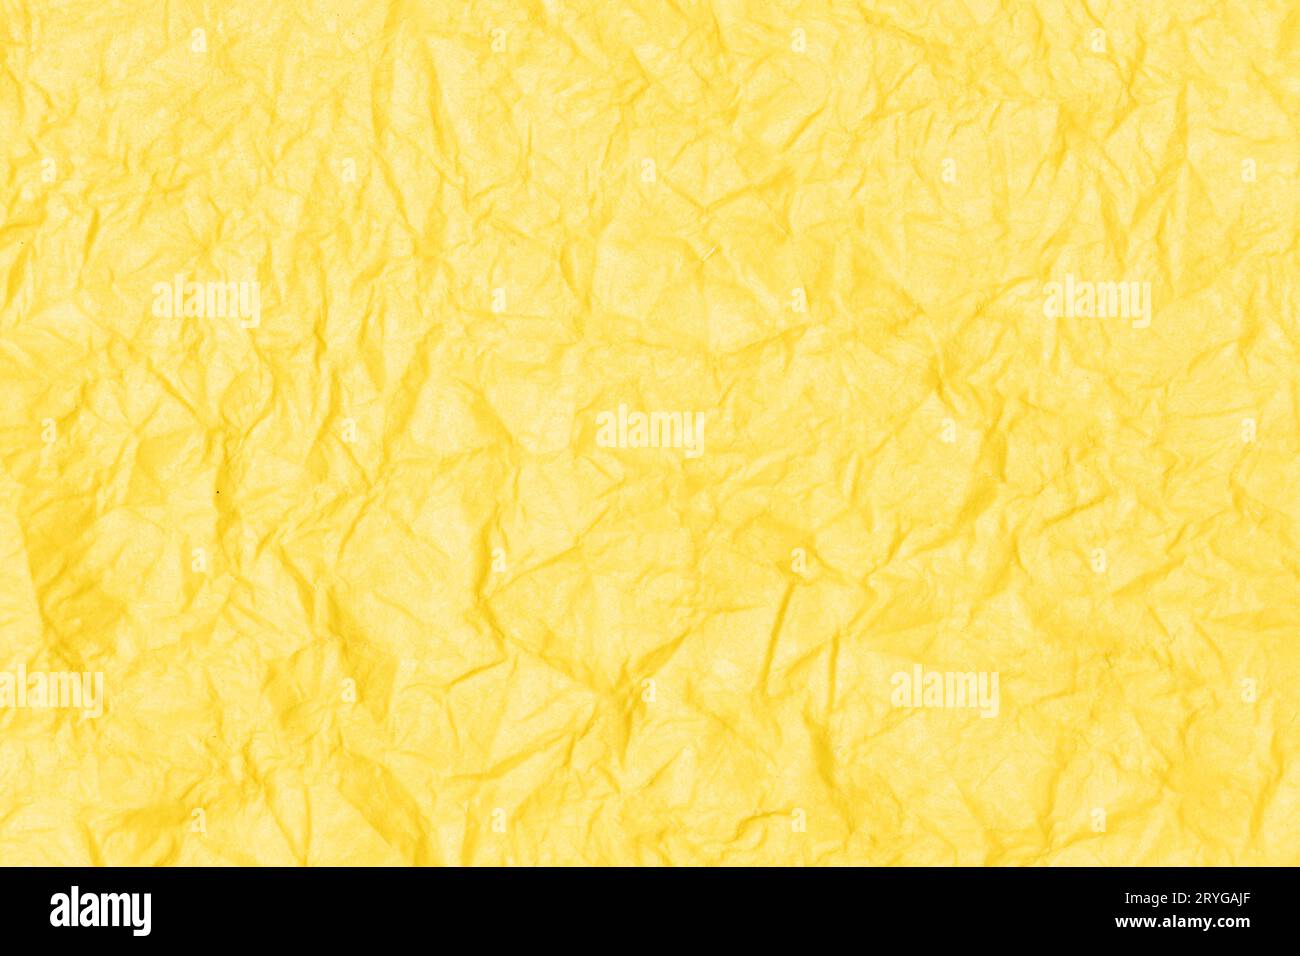 Crumpled paper abstract background texture. Yellow color. Full frame Stock Photo